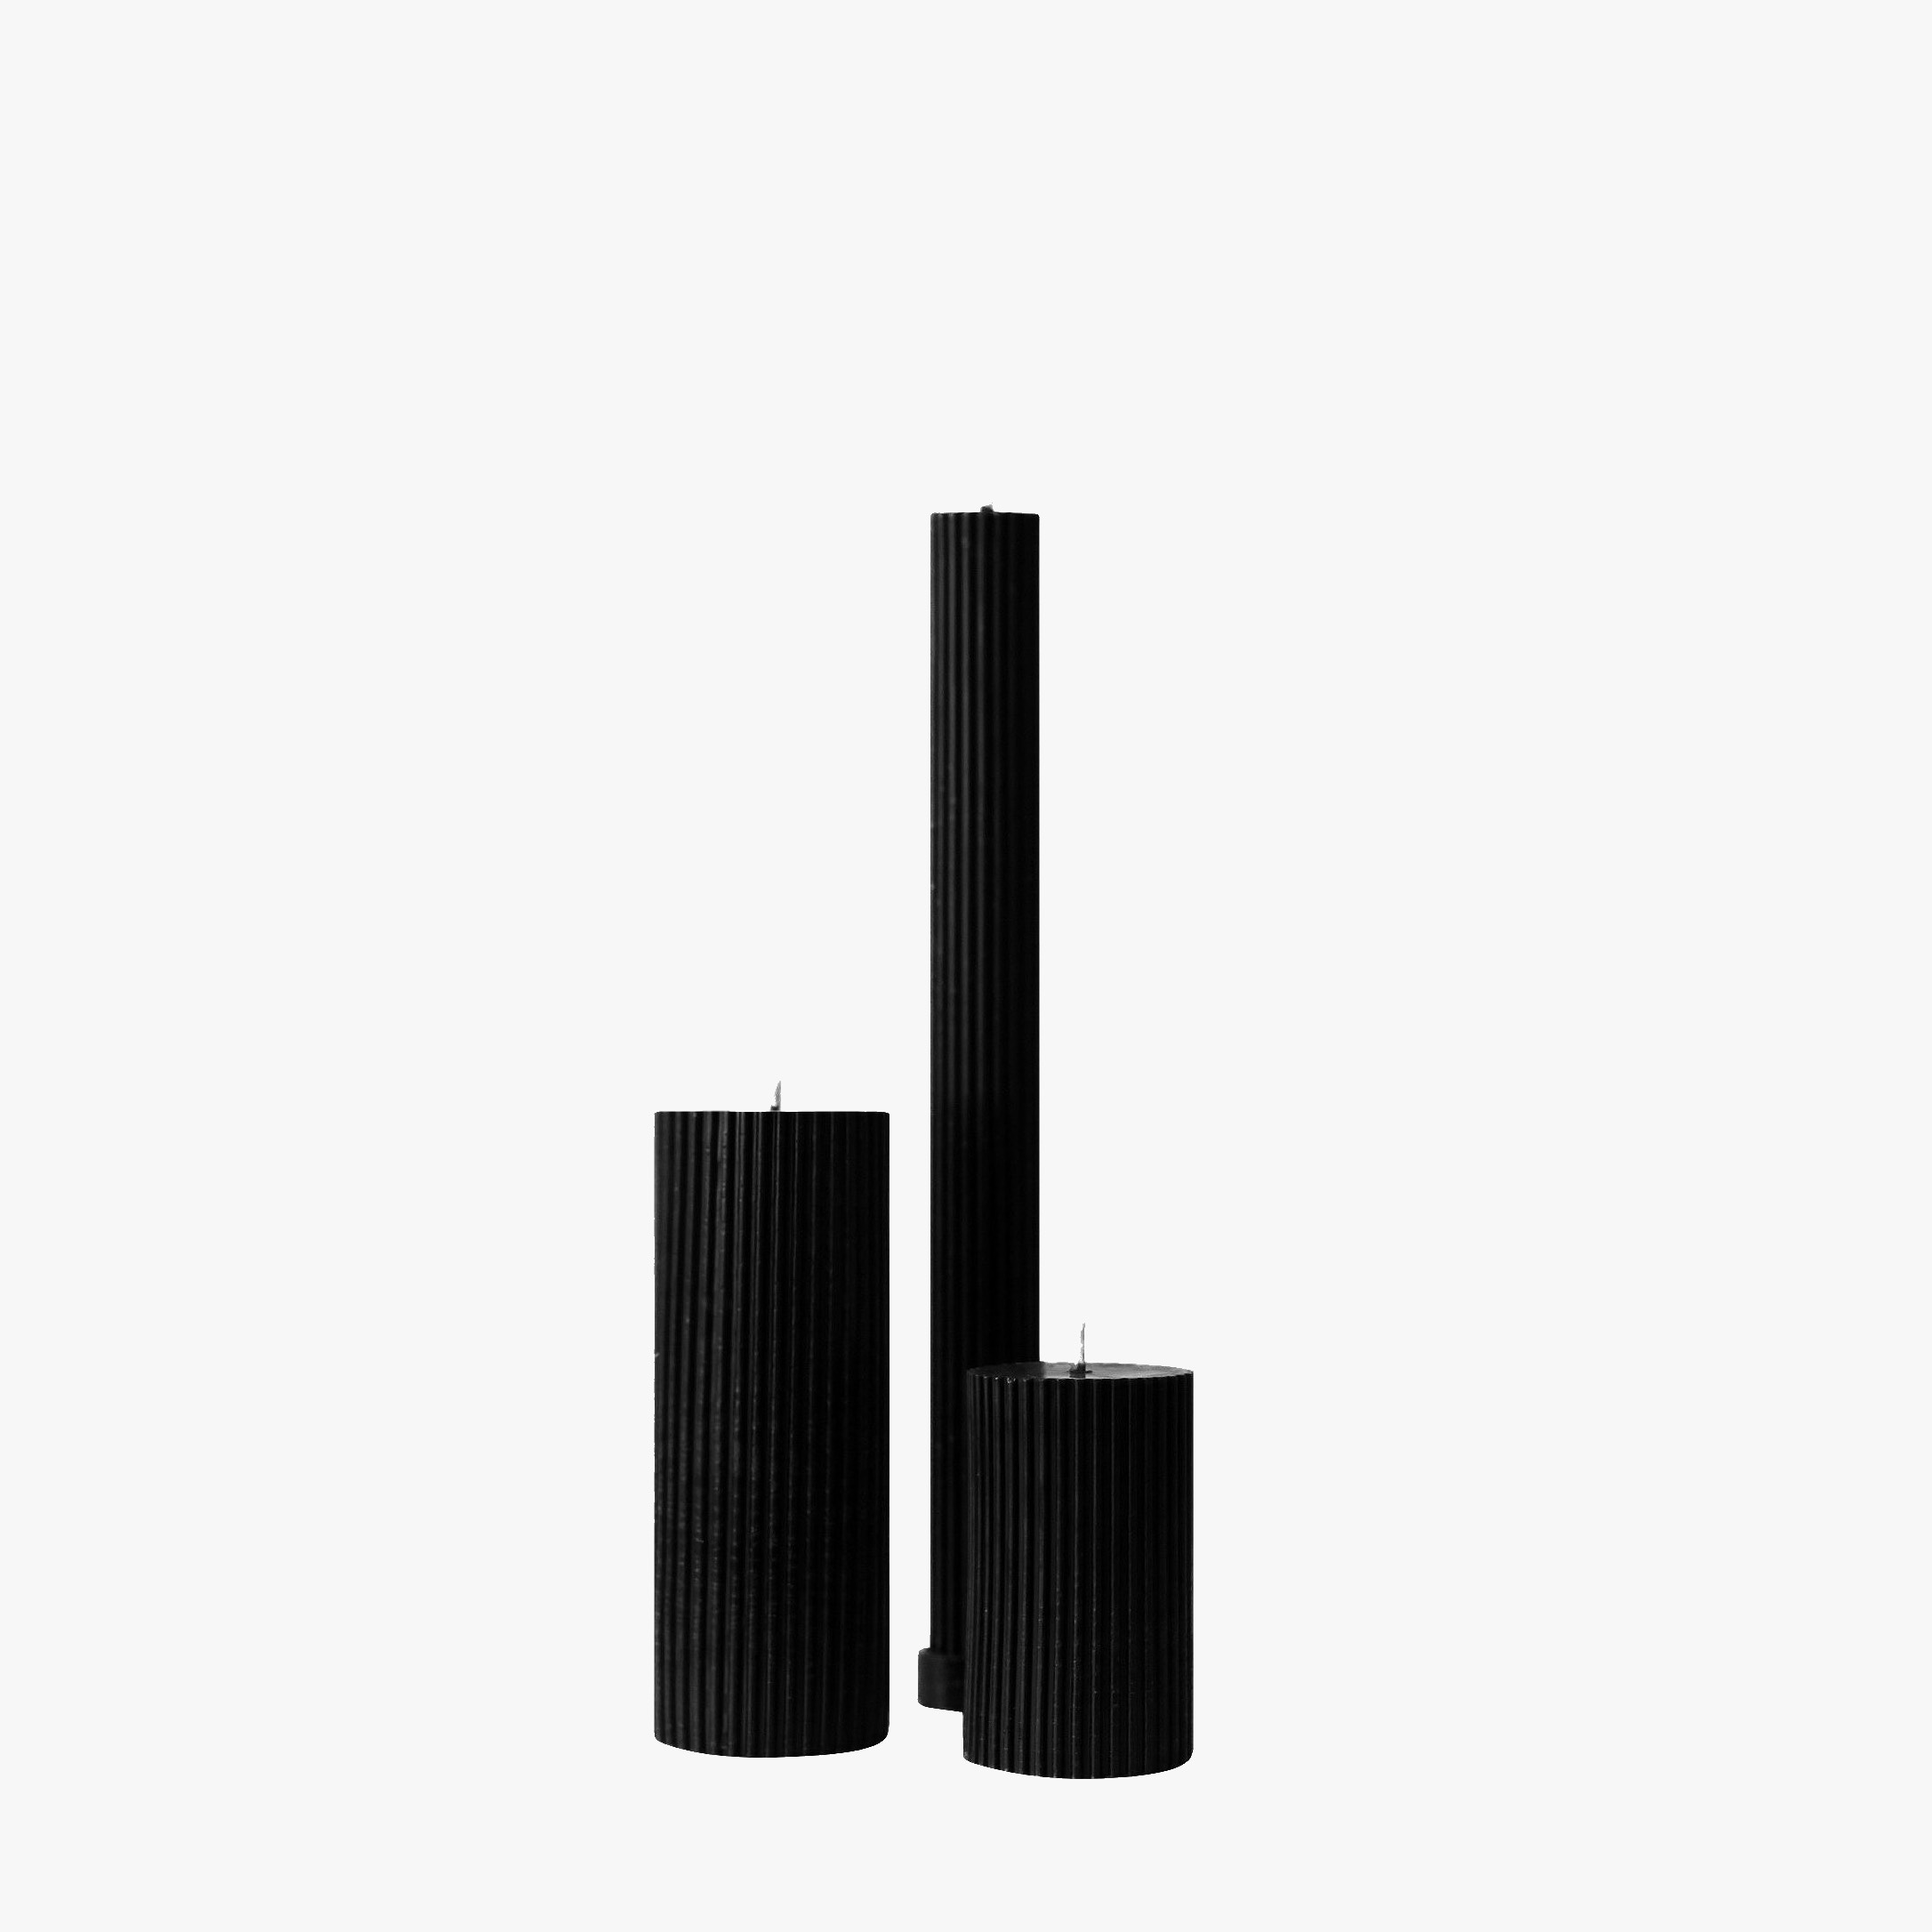 Bzzwax & co Cylinders Candle Set in Black